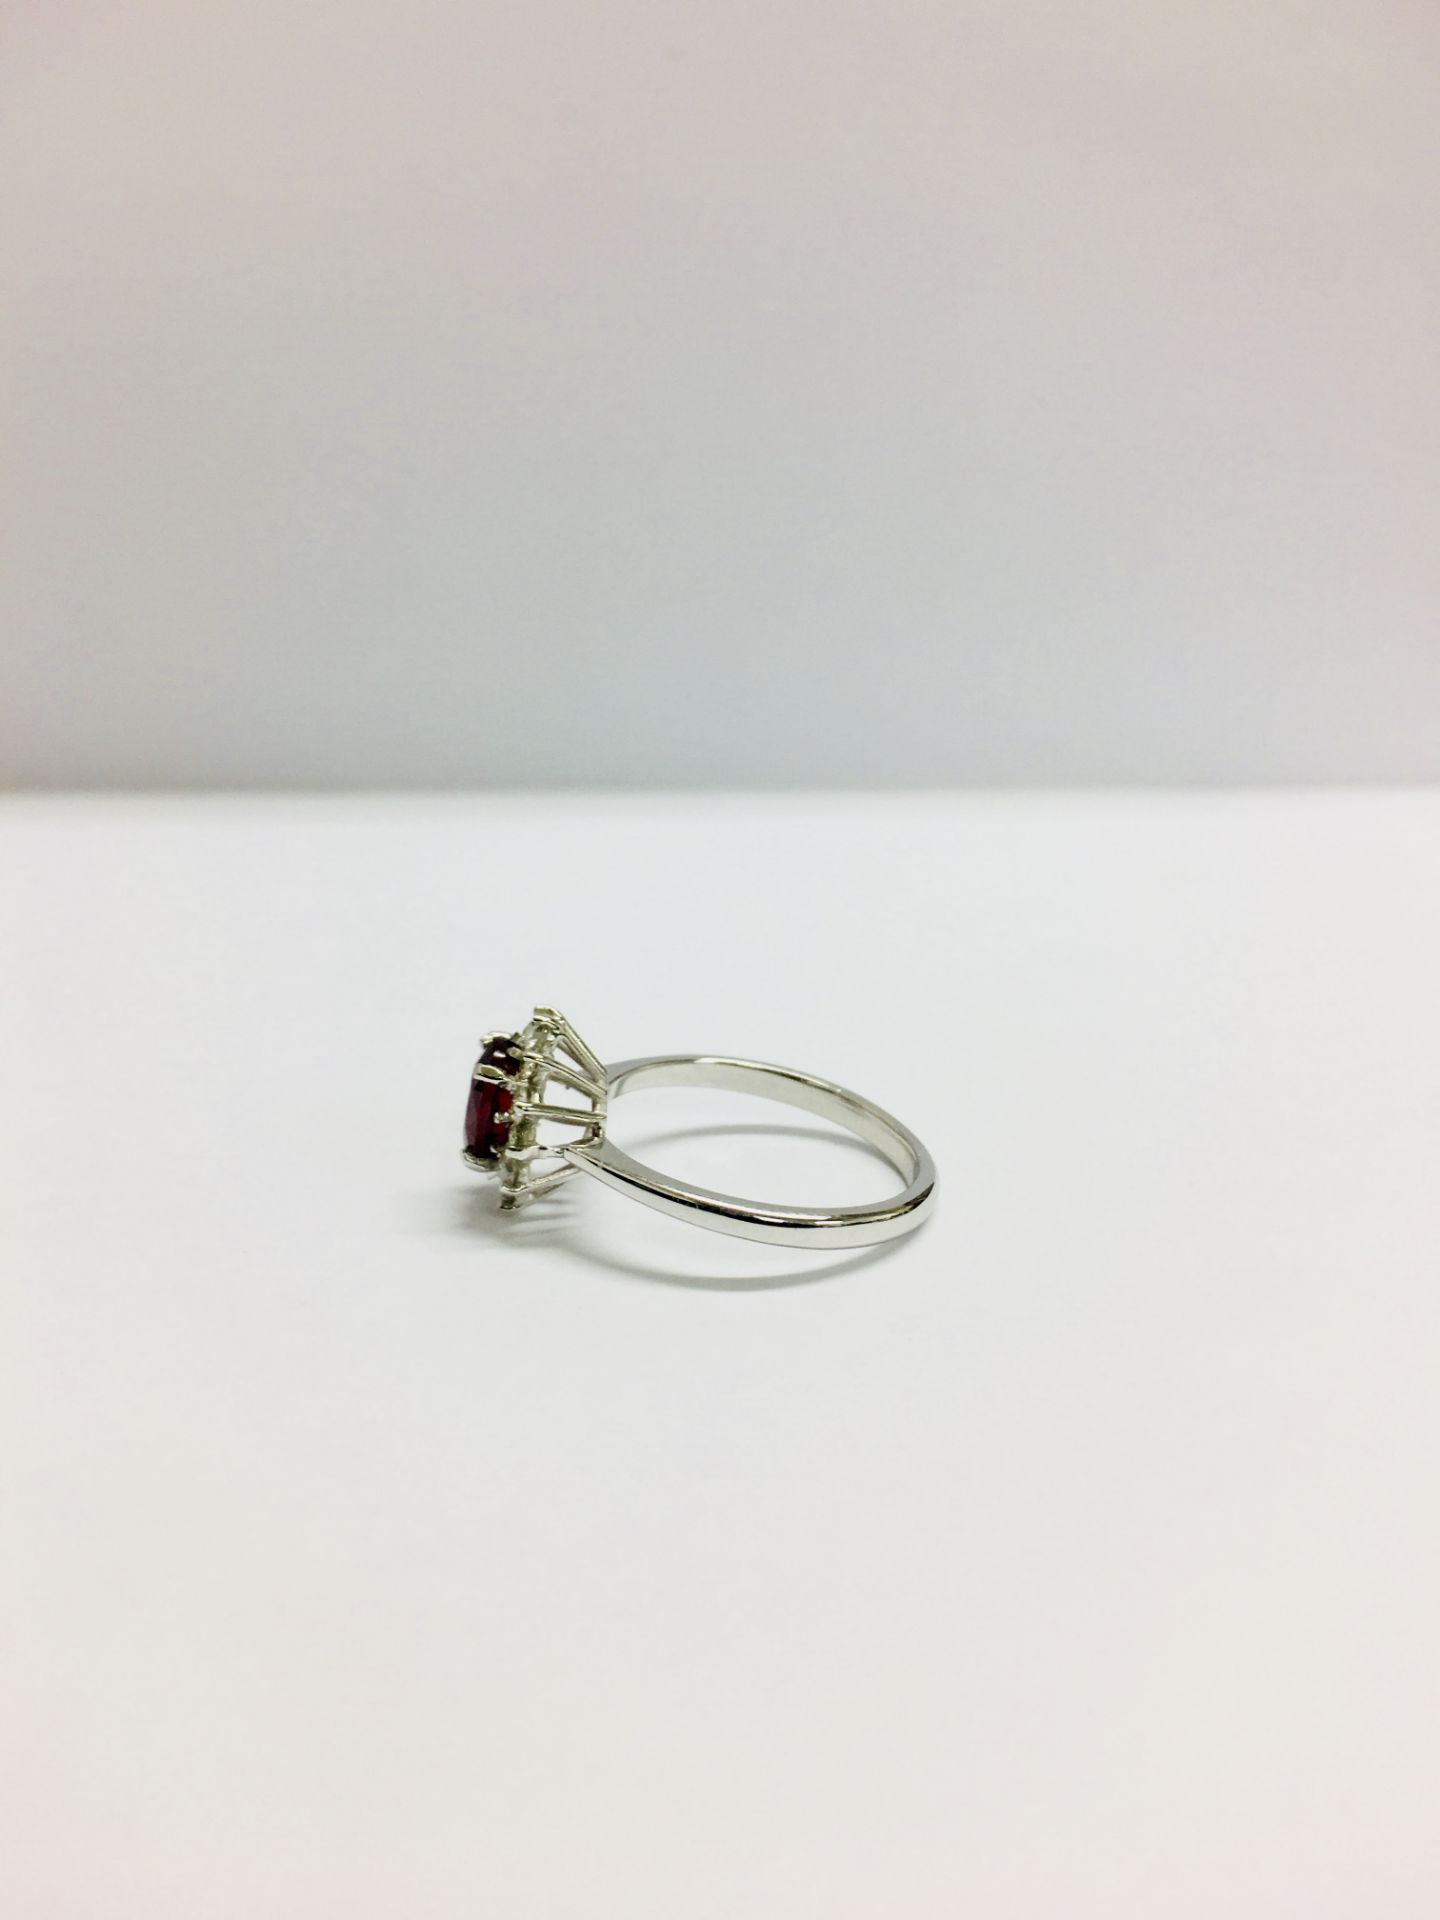 0.80Ct Ruby And Diamond Cluster Ring Set With A Oval Cut(Glass Filled) Ruby - Image 2 of 5